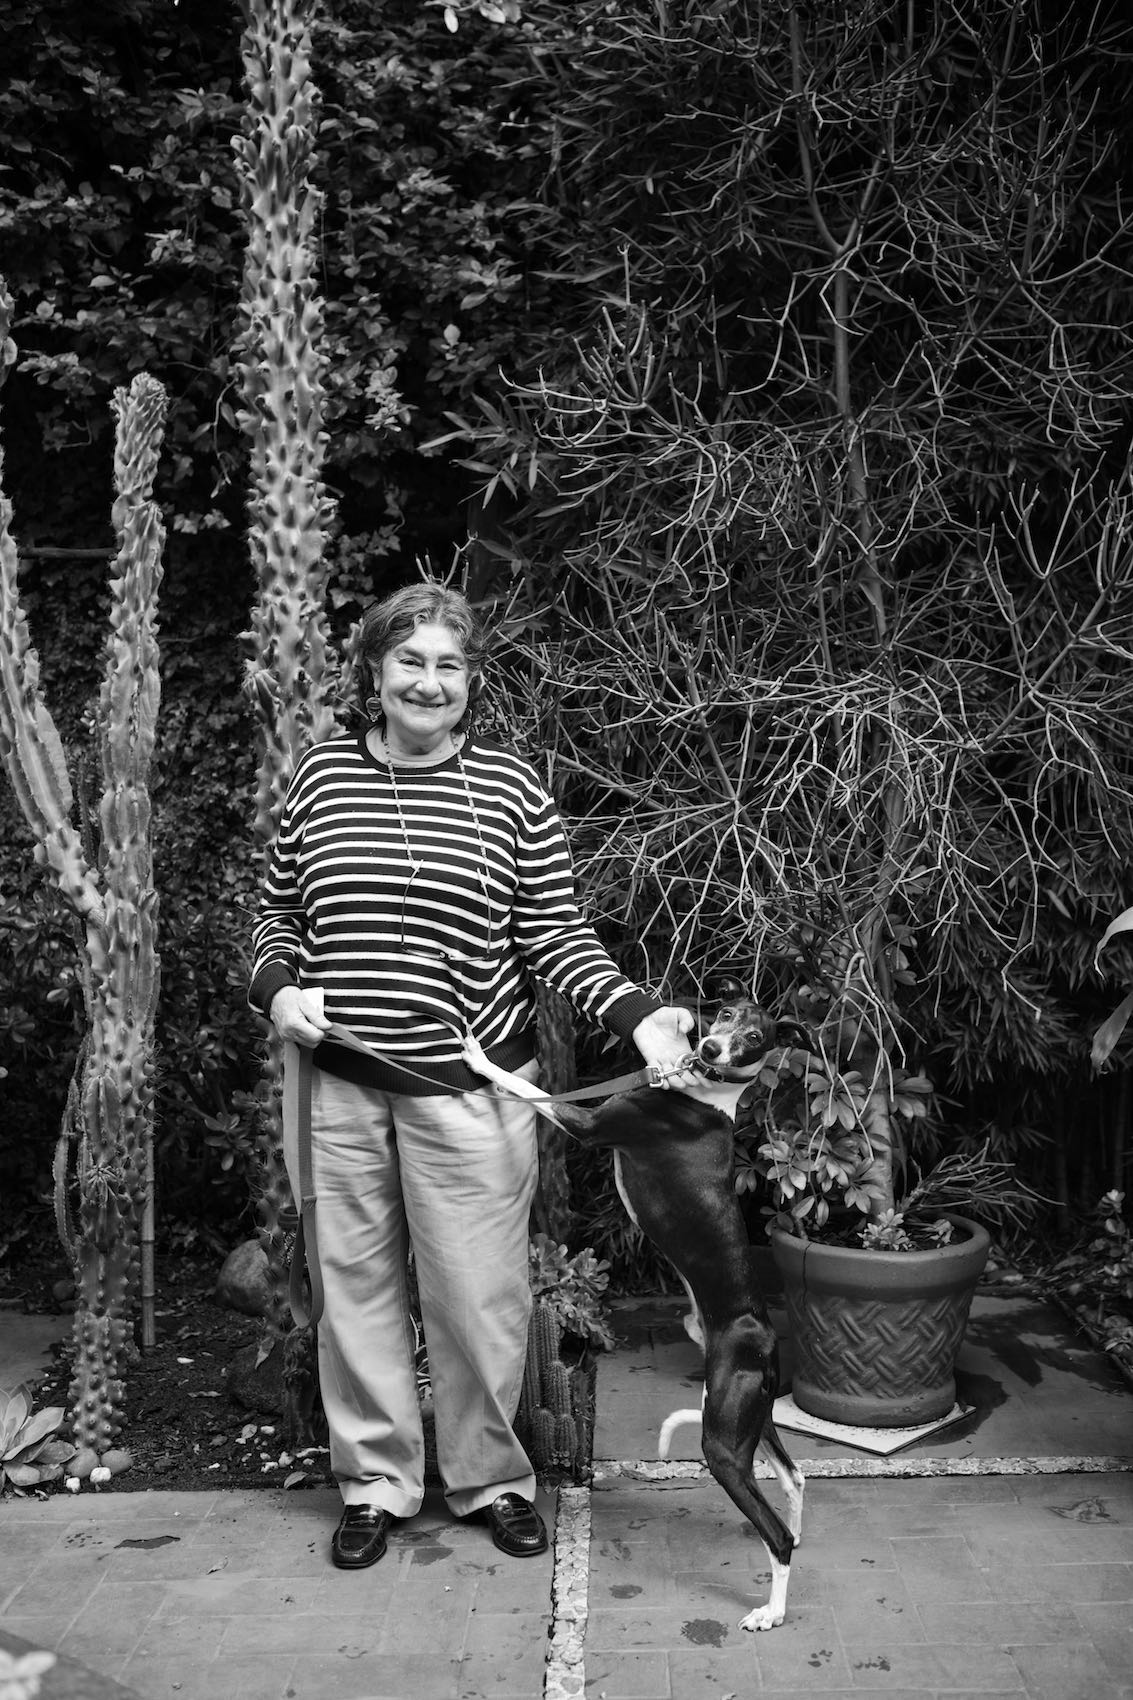 Jody Horton Photography - Woman and her dog posing against greenery, shot in B&W.